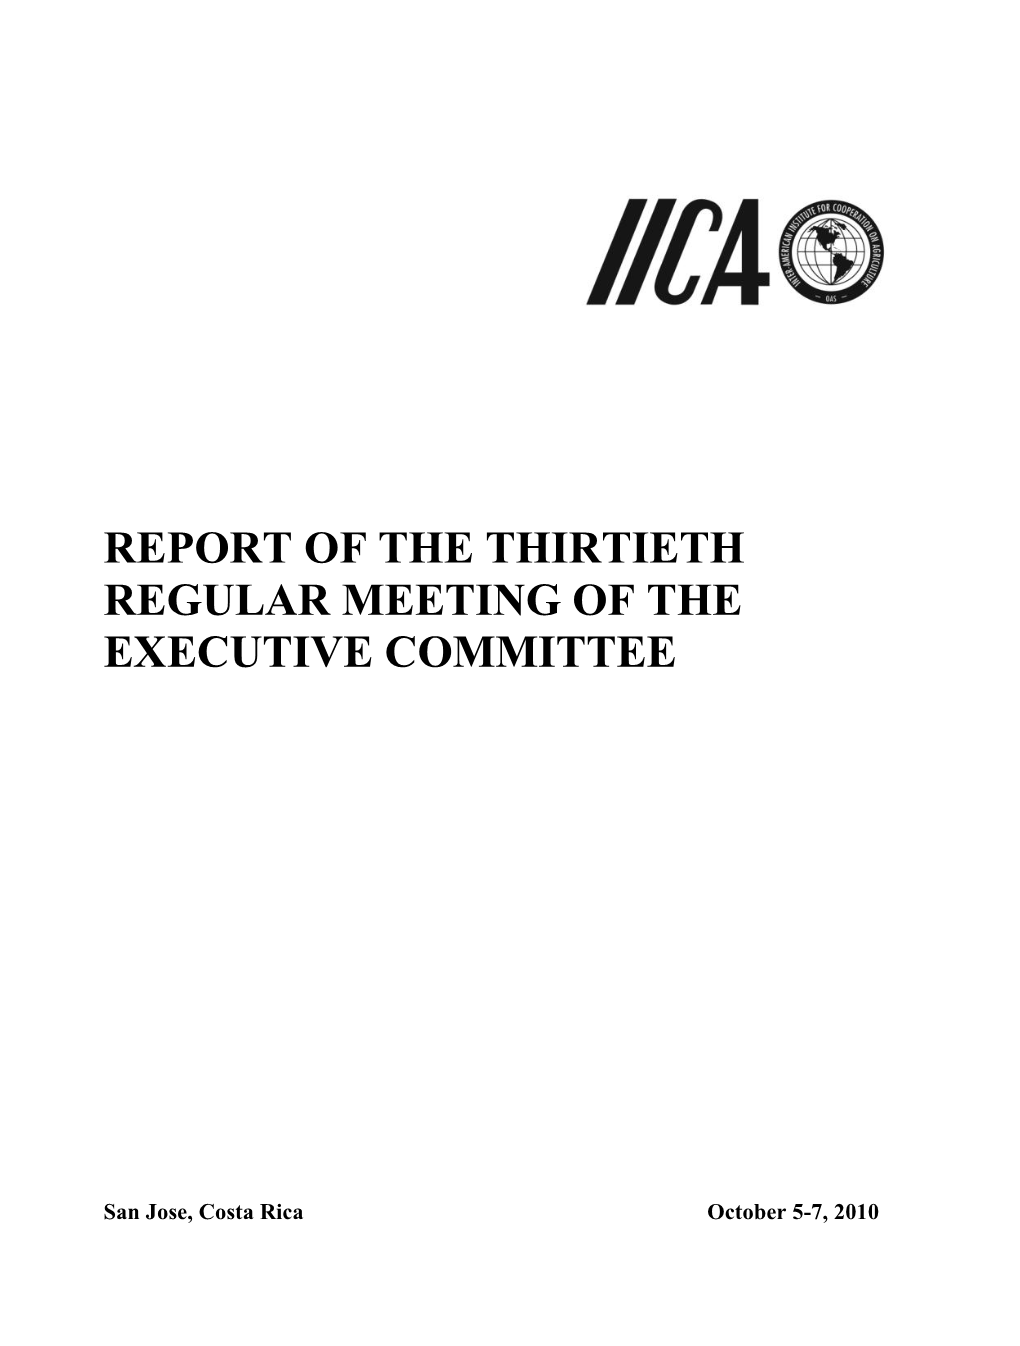 Report of the Thirtieth Regular Meeting of the Executive Committee